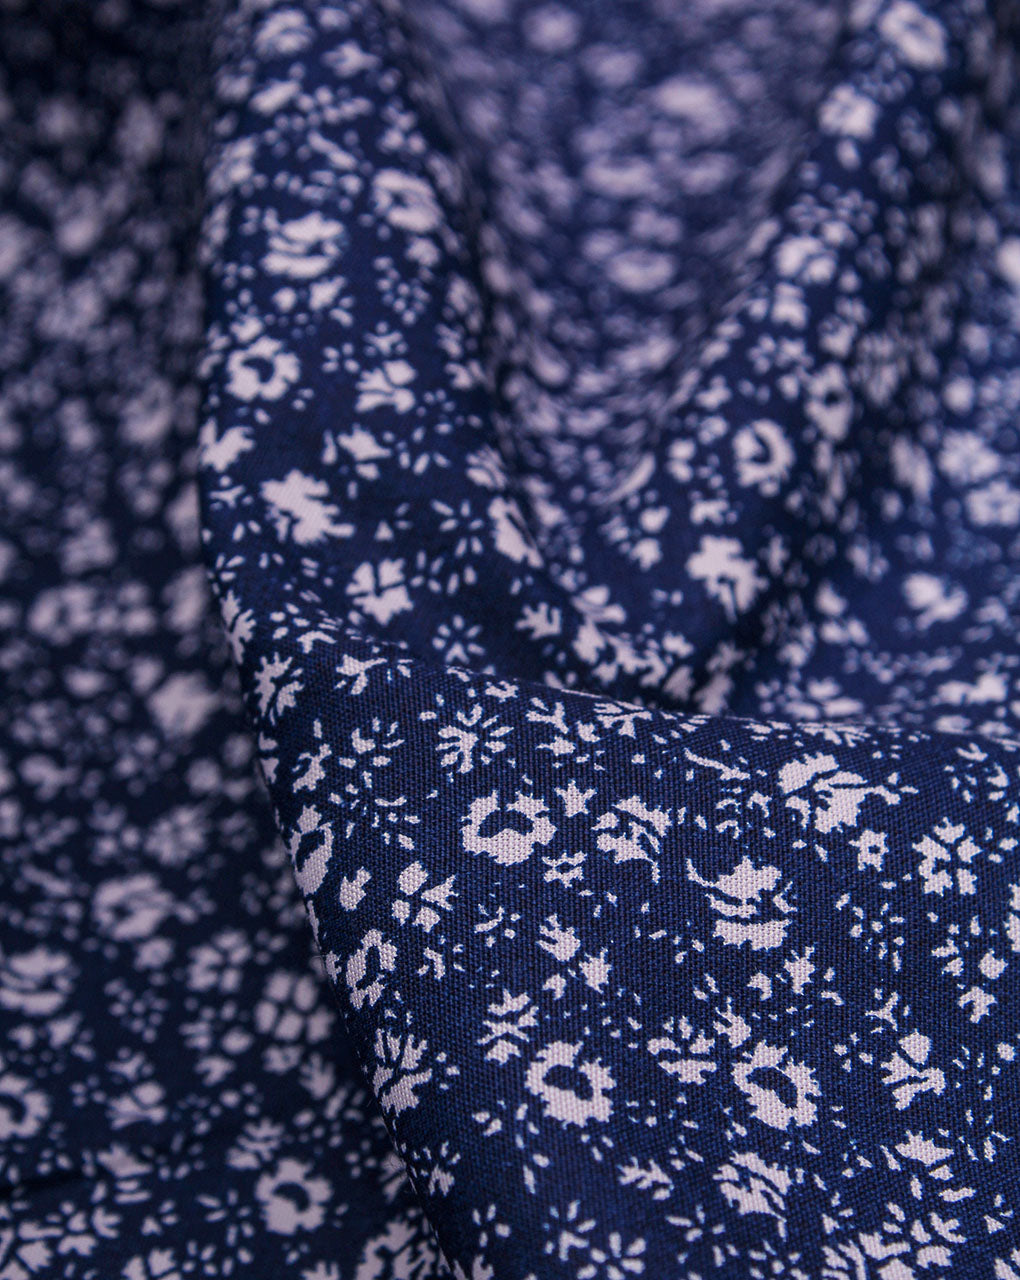 Navy Blue And Pink Floral Design Cotton Print Fabric